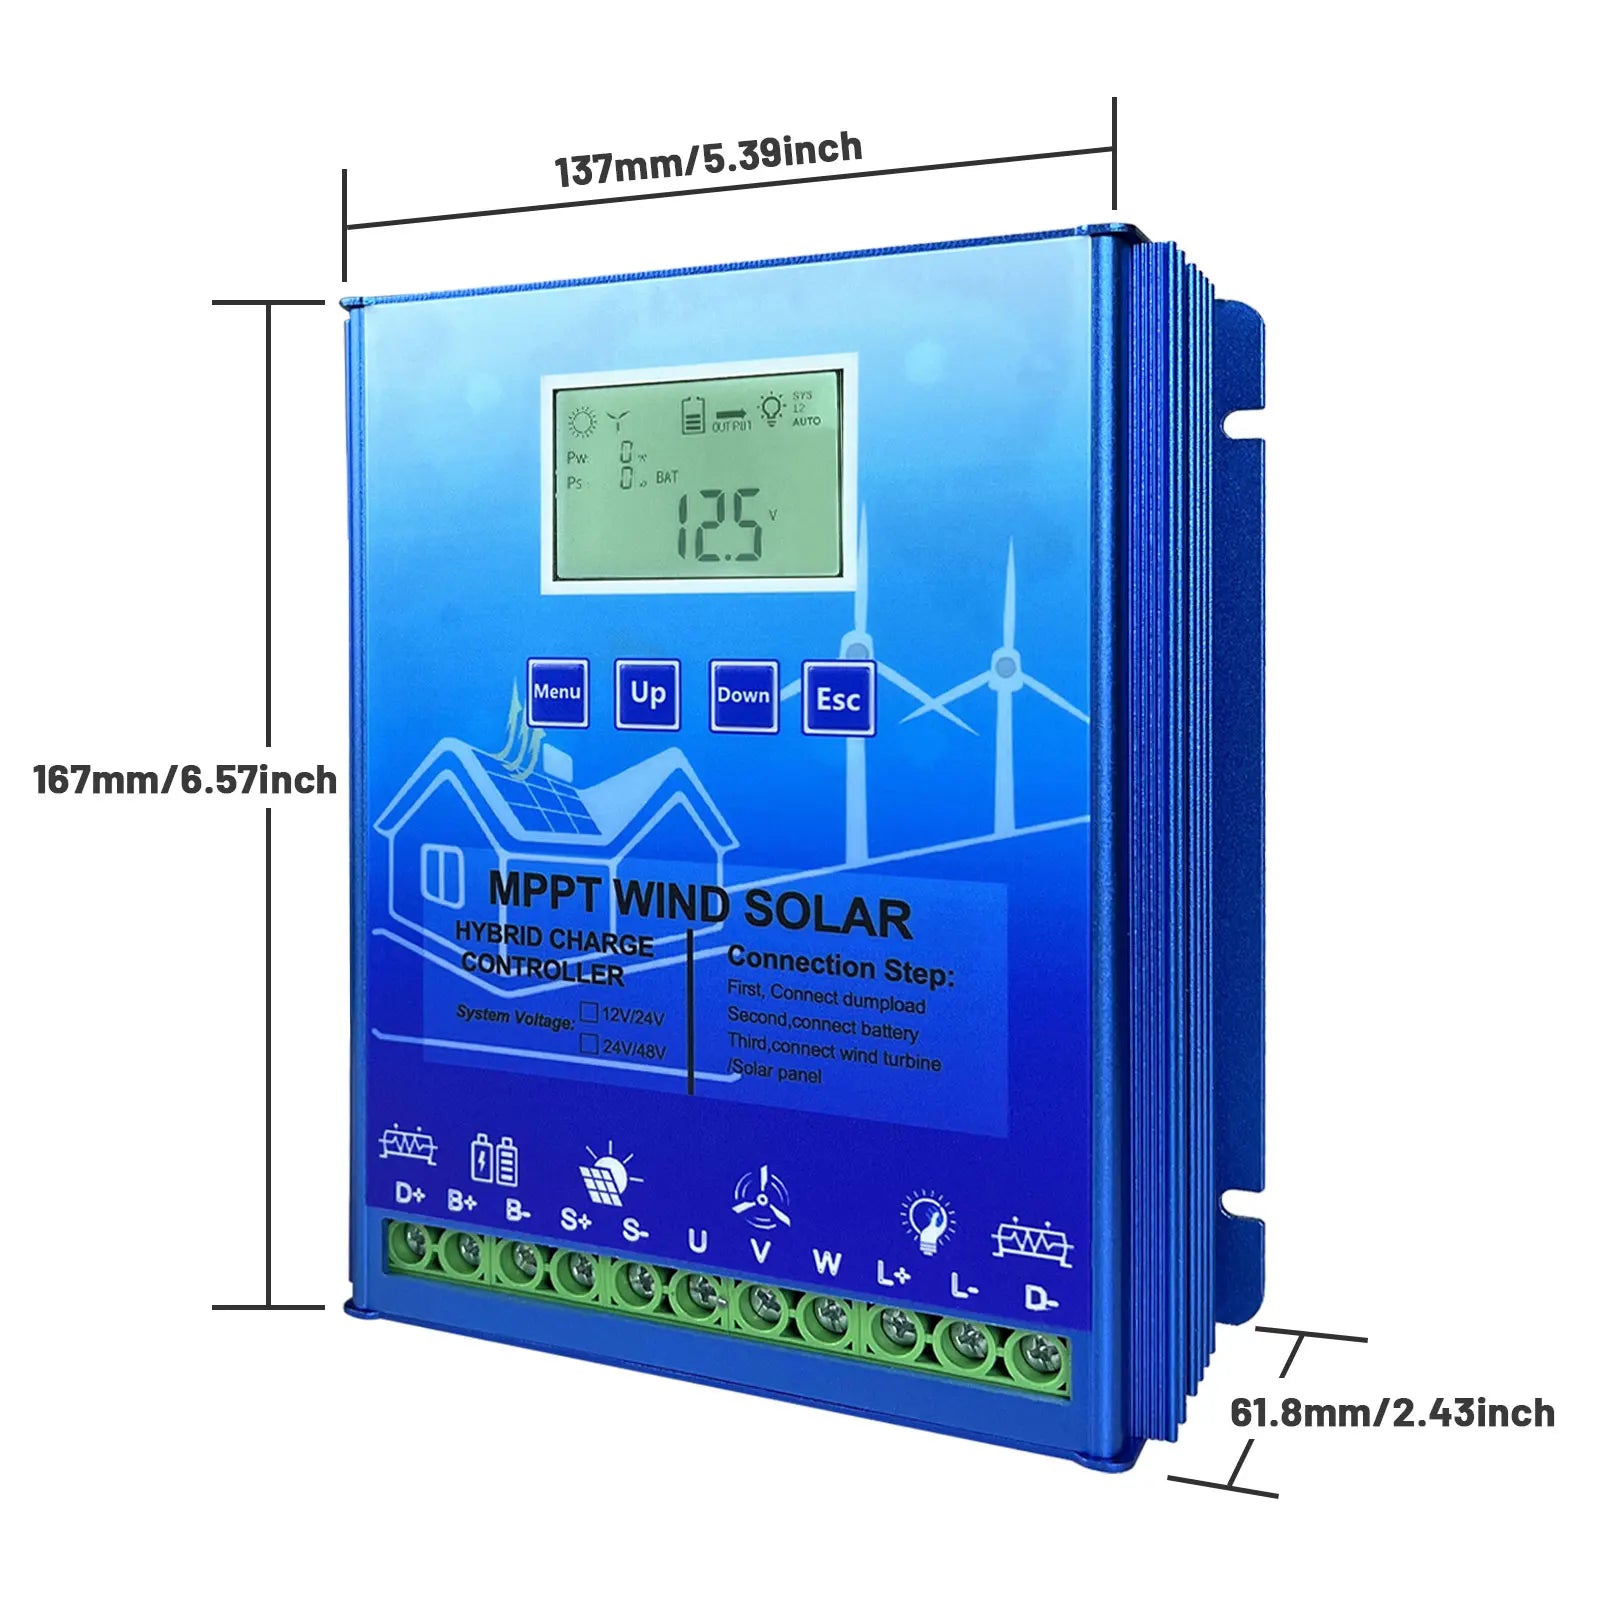 3000W MPPT Hybrid Solar Wind Charge Controller, Hybrid Solar Wind Charge Controller for 12V, 24V, or 48V systems with Wi-Fi connectivity.